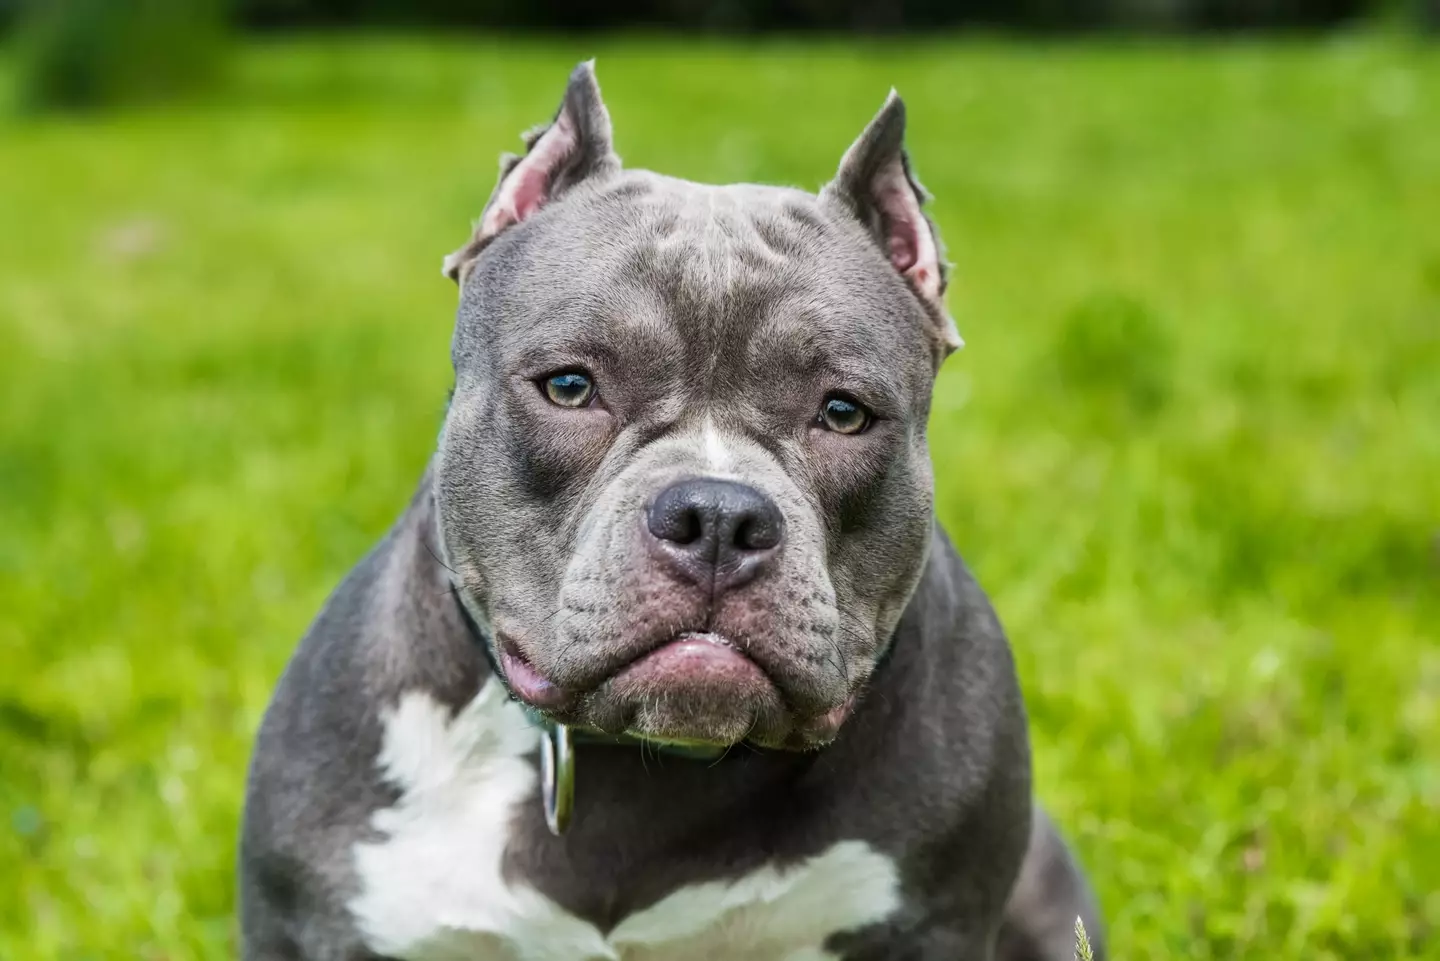 XL American bully dogs are going to be banned.